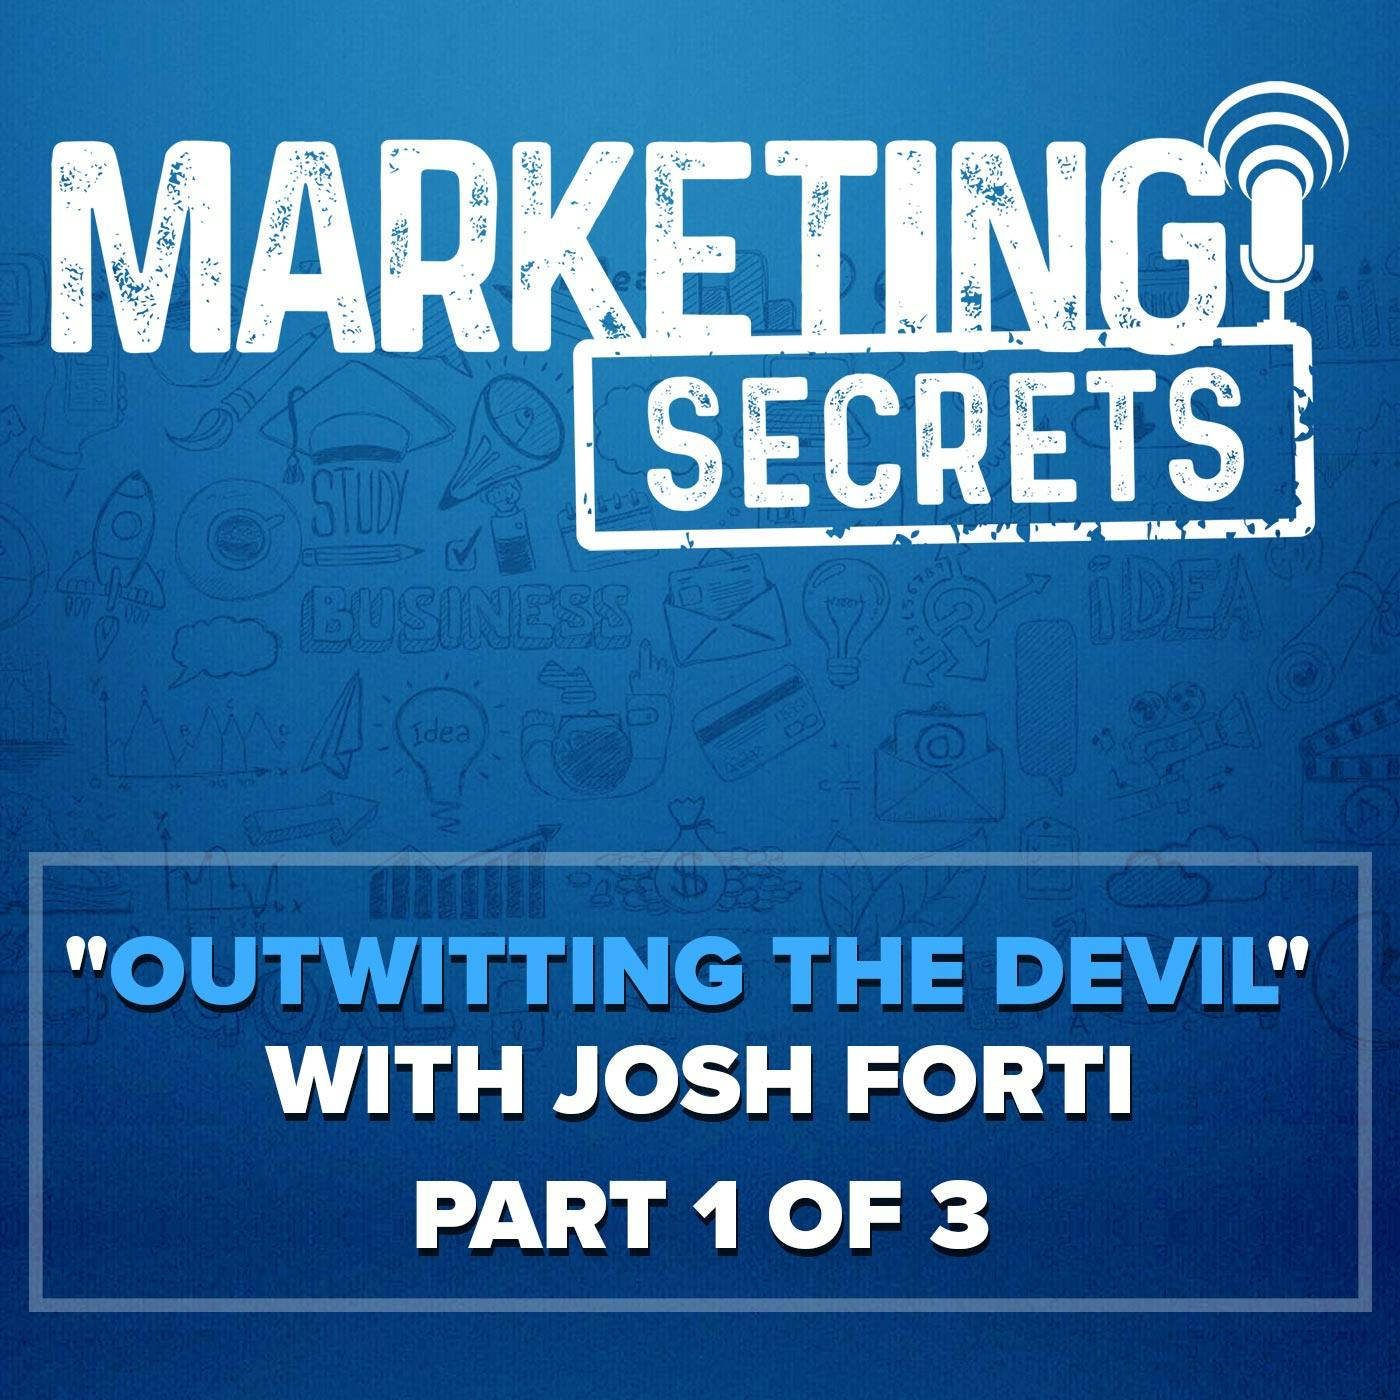 "Outwitting The Devil" with Josh Forti - Part 1 of 3